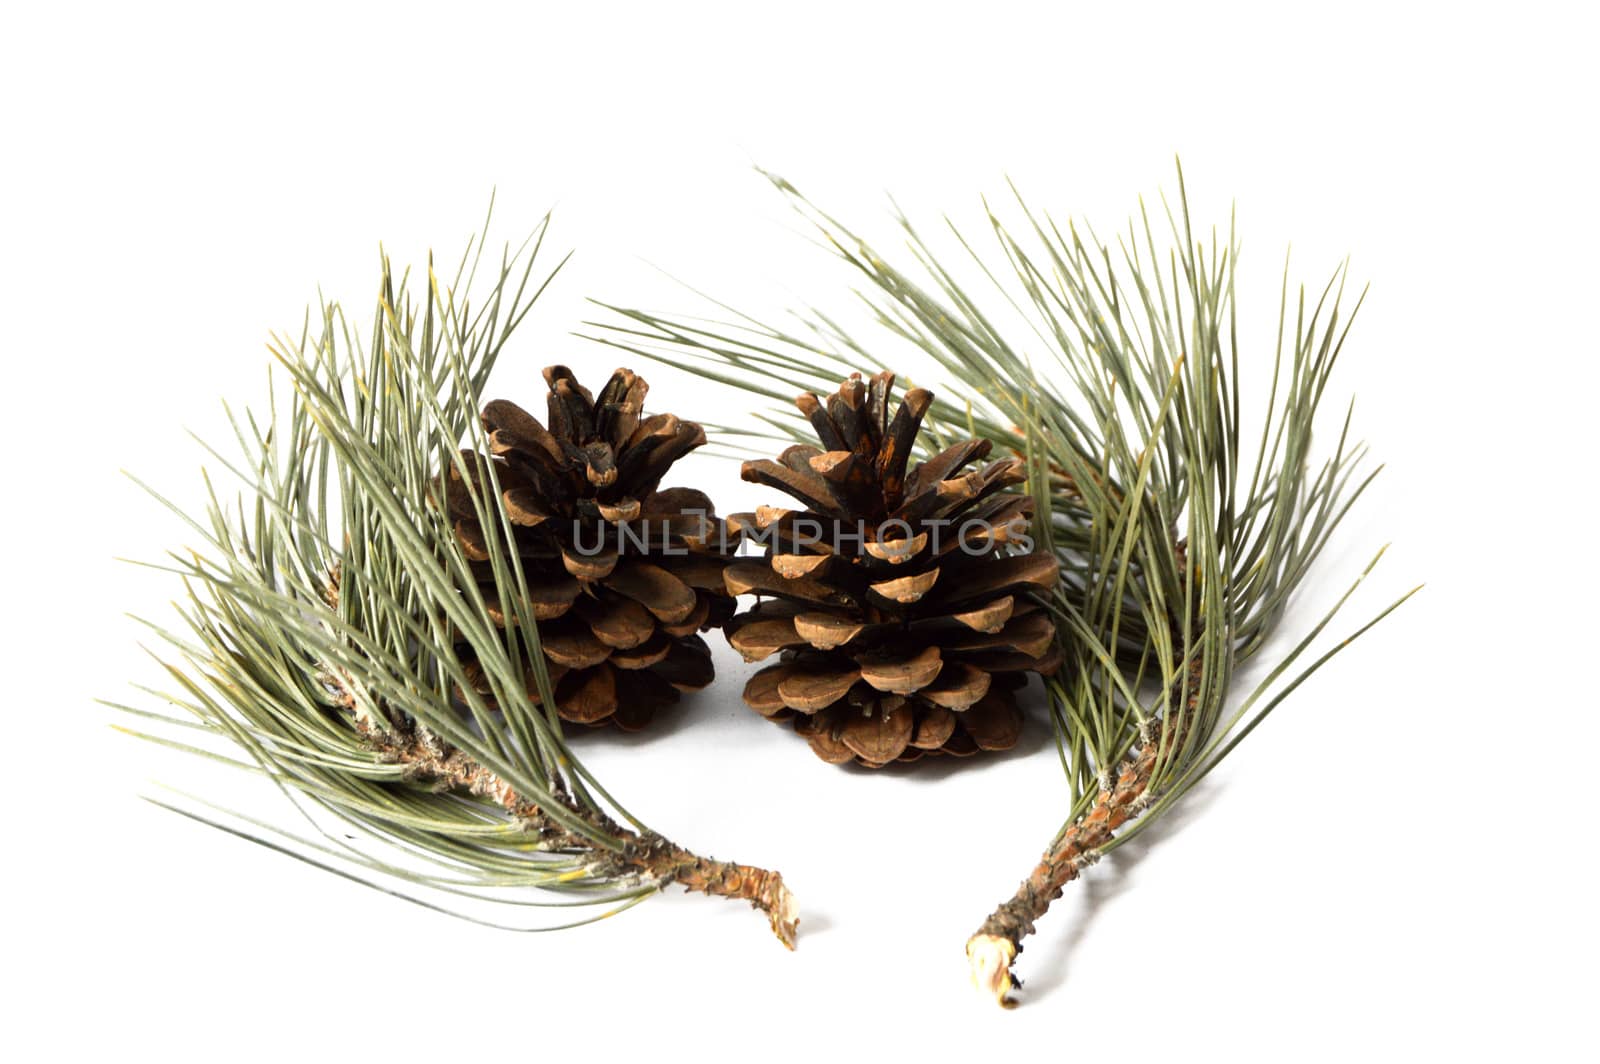 Pictures of pine cones